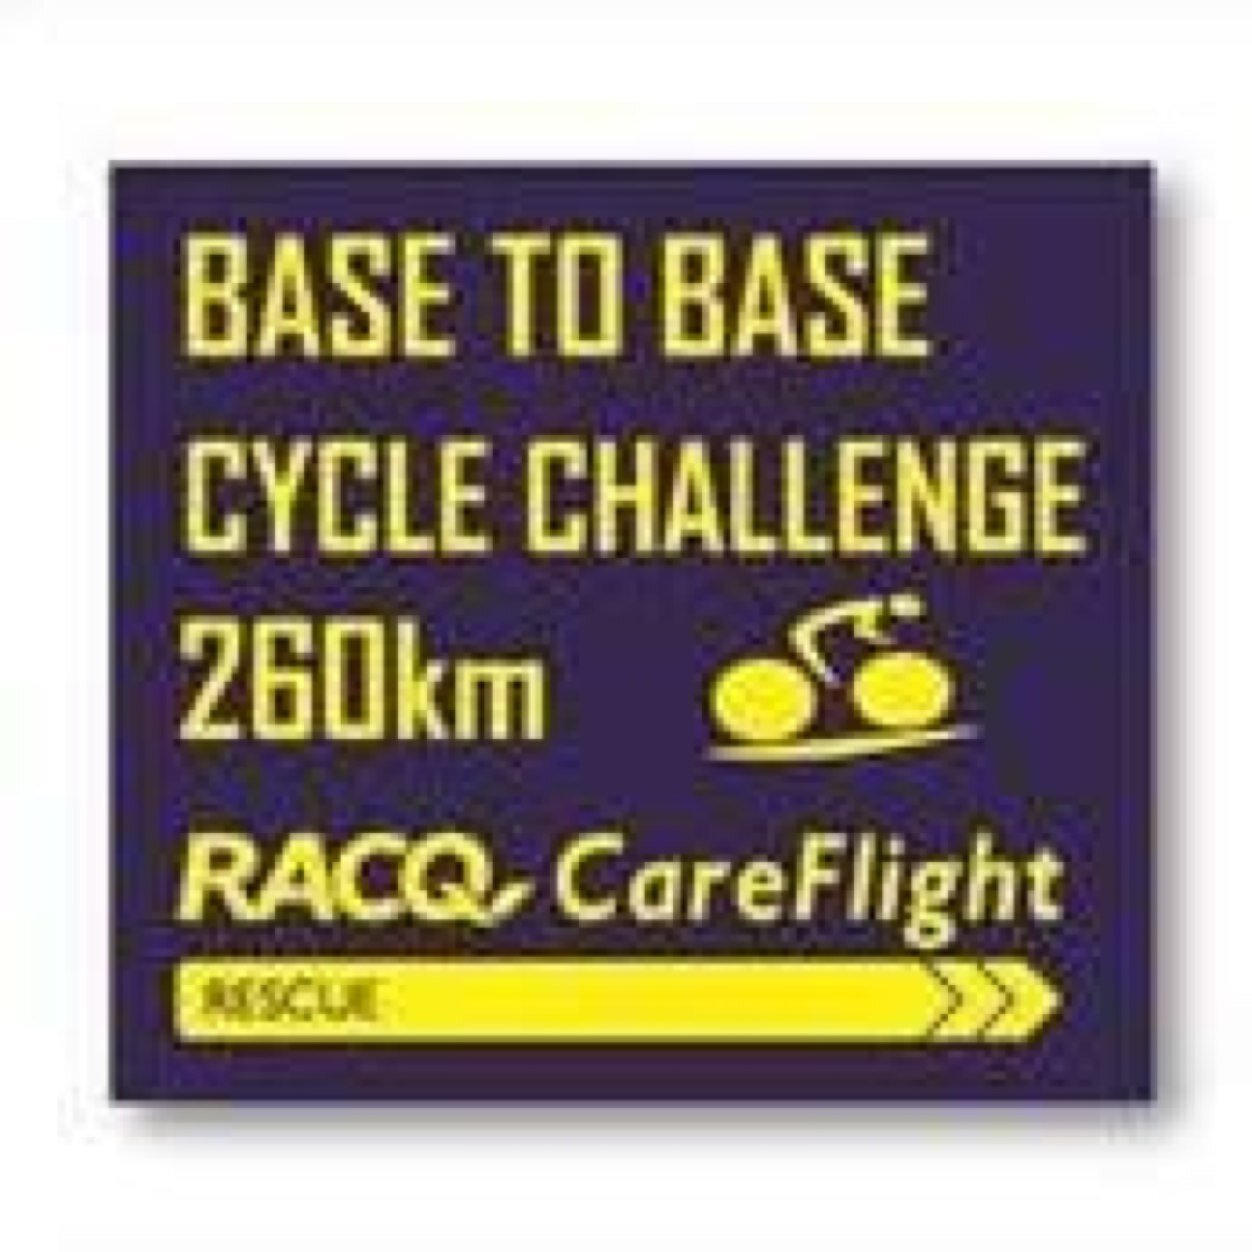 CareFlight Base to Base Cycle Challenge is on Sunday 3rd of May 2015. 50 Elite Cyclists, CEOs and Celebrities will ride from Gold Coast to Toowoomba.